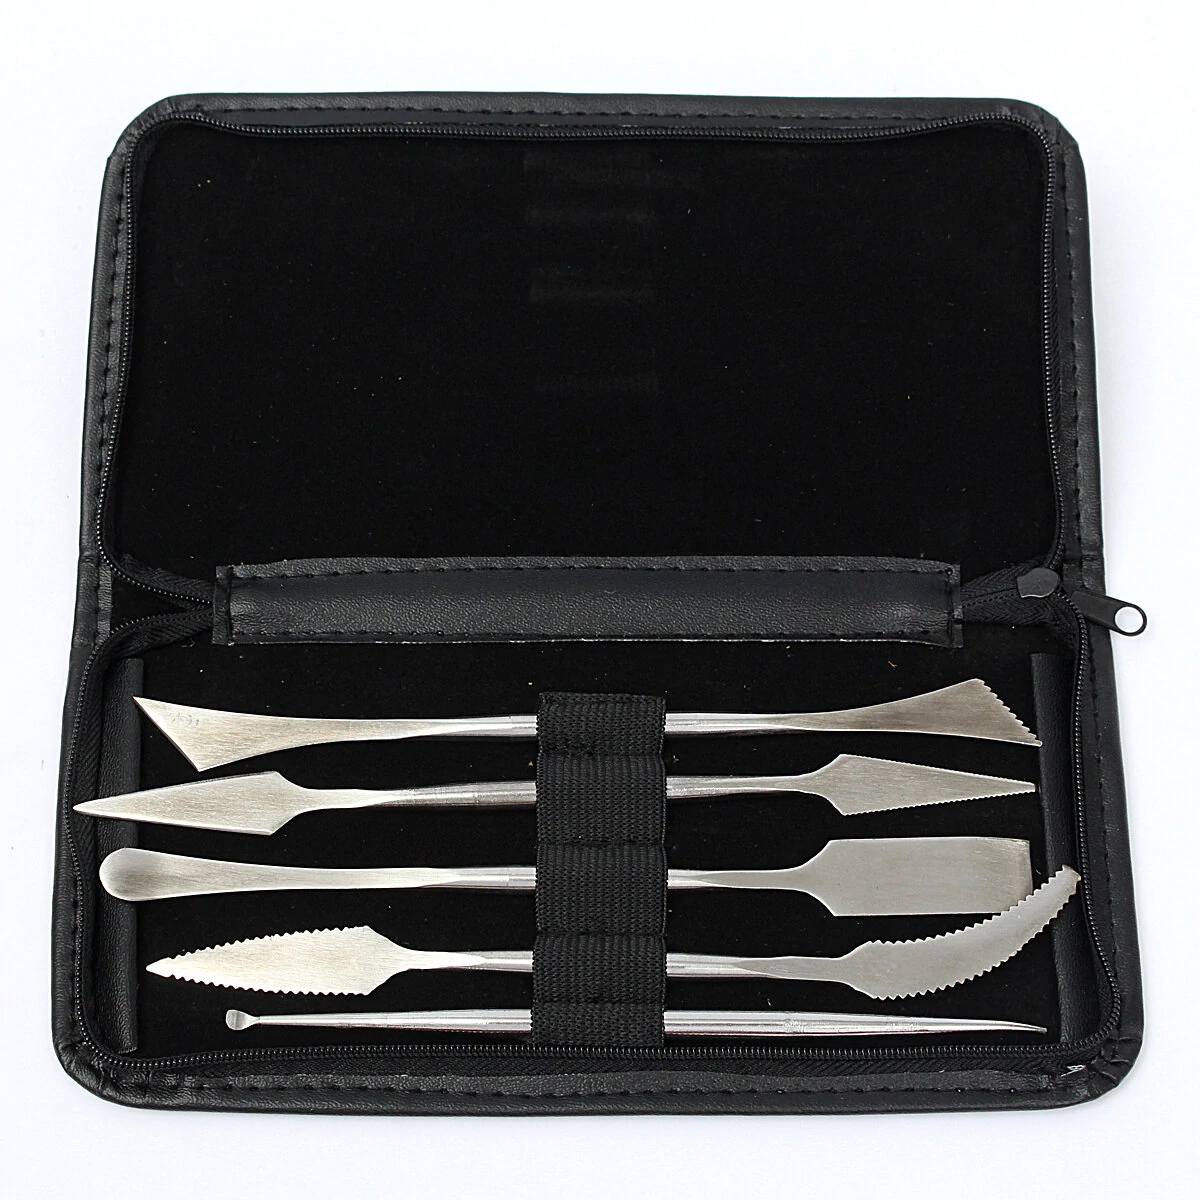 5Pcs set Clay Scrapers Stainless Steel Clay Sculpting Tools Carving Pottery Tools Artist Supplies